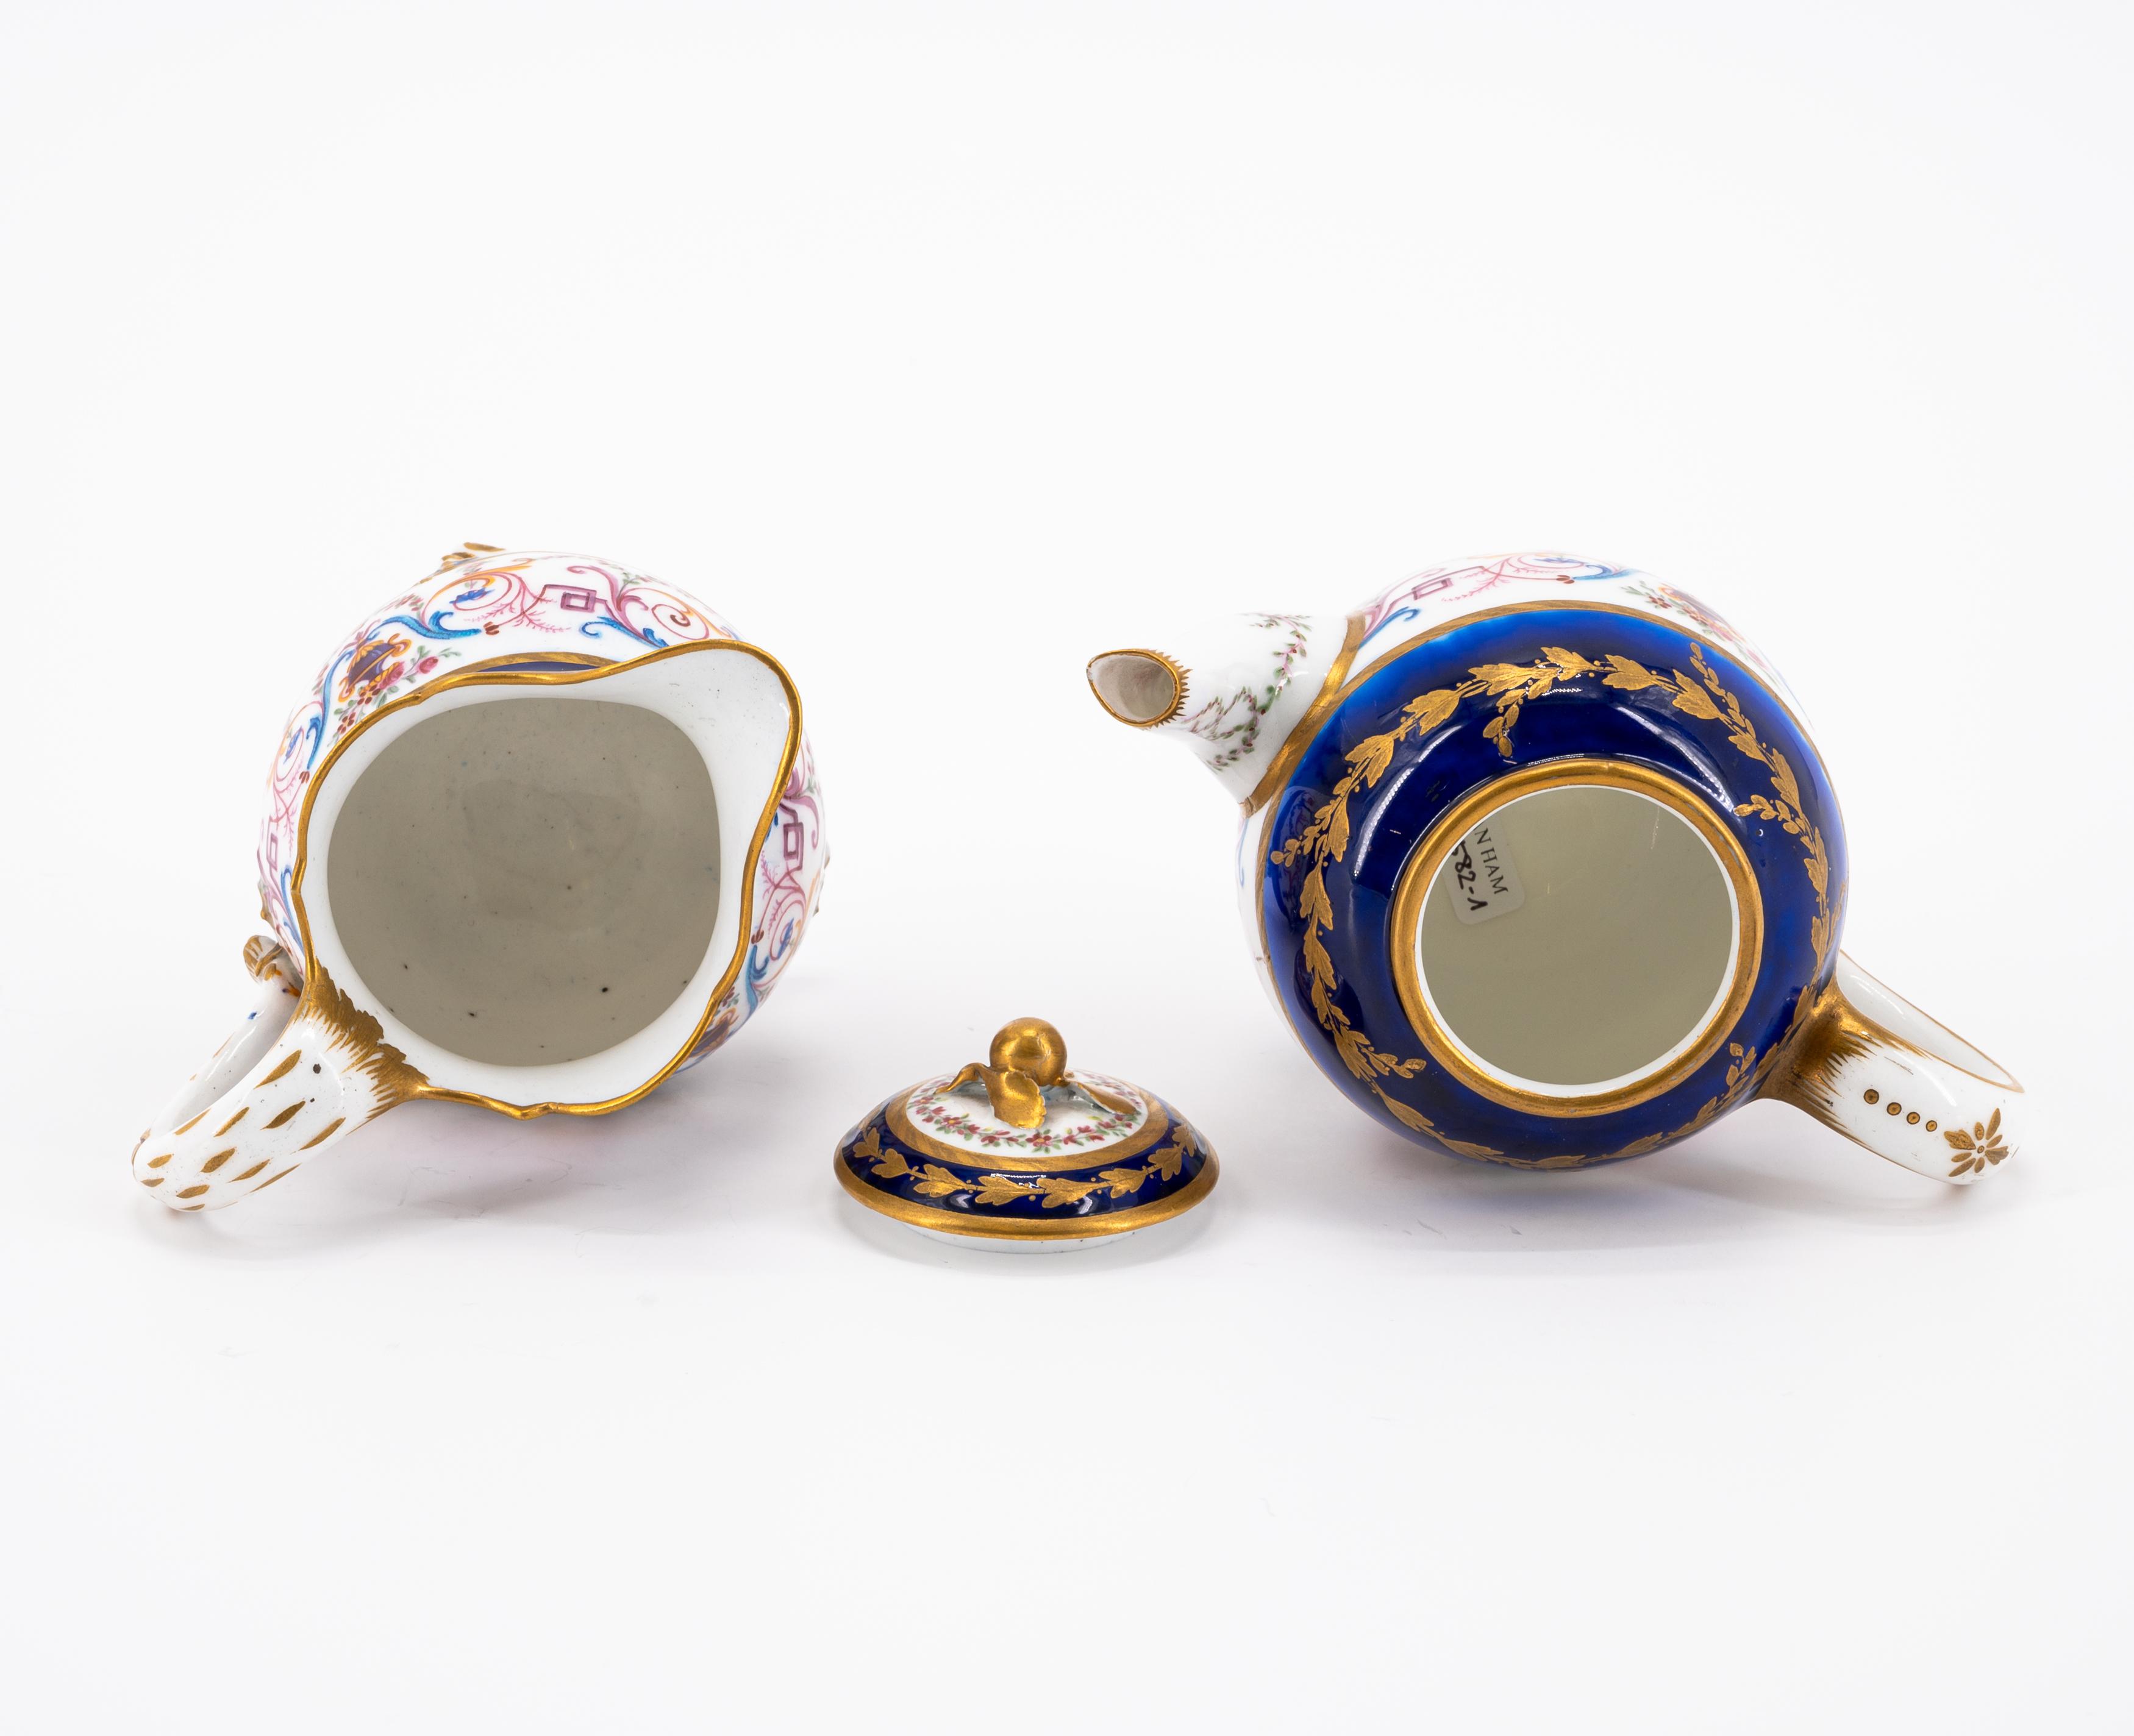 PORCELAIN SOLITAIRE WITH TENDRIL DECORATIONS AND DEEP BLUE GROUND - Image 12 of 13